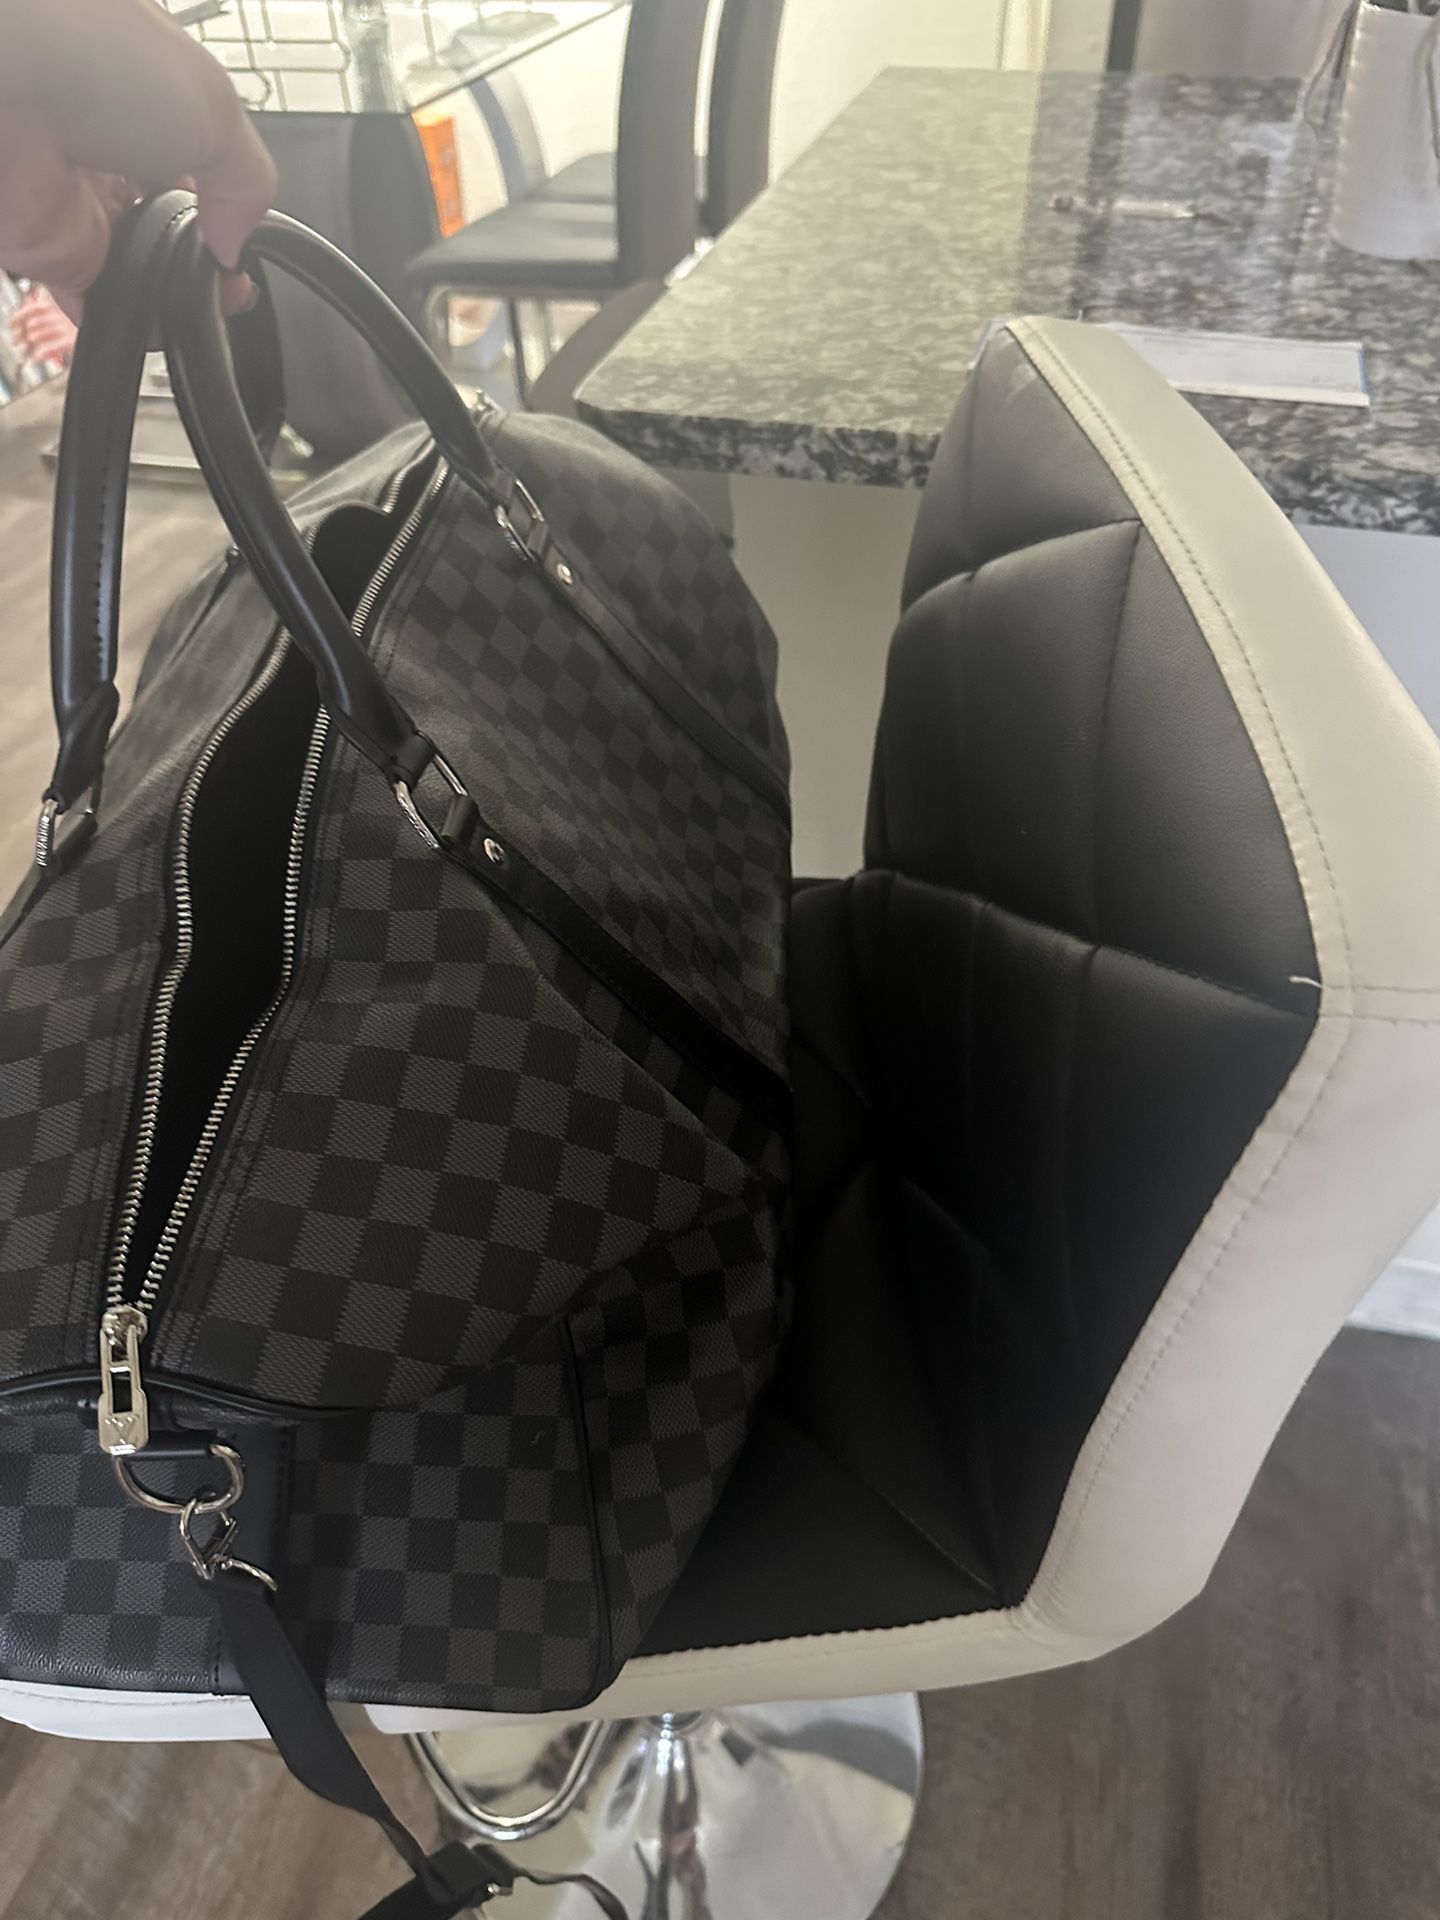 Louis Vuitton Small Duffle Bag for Sale in Ind Crk Vlg, FL - OfferUp